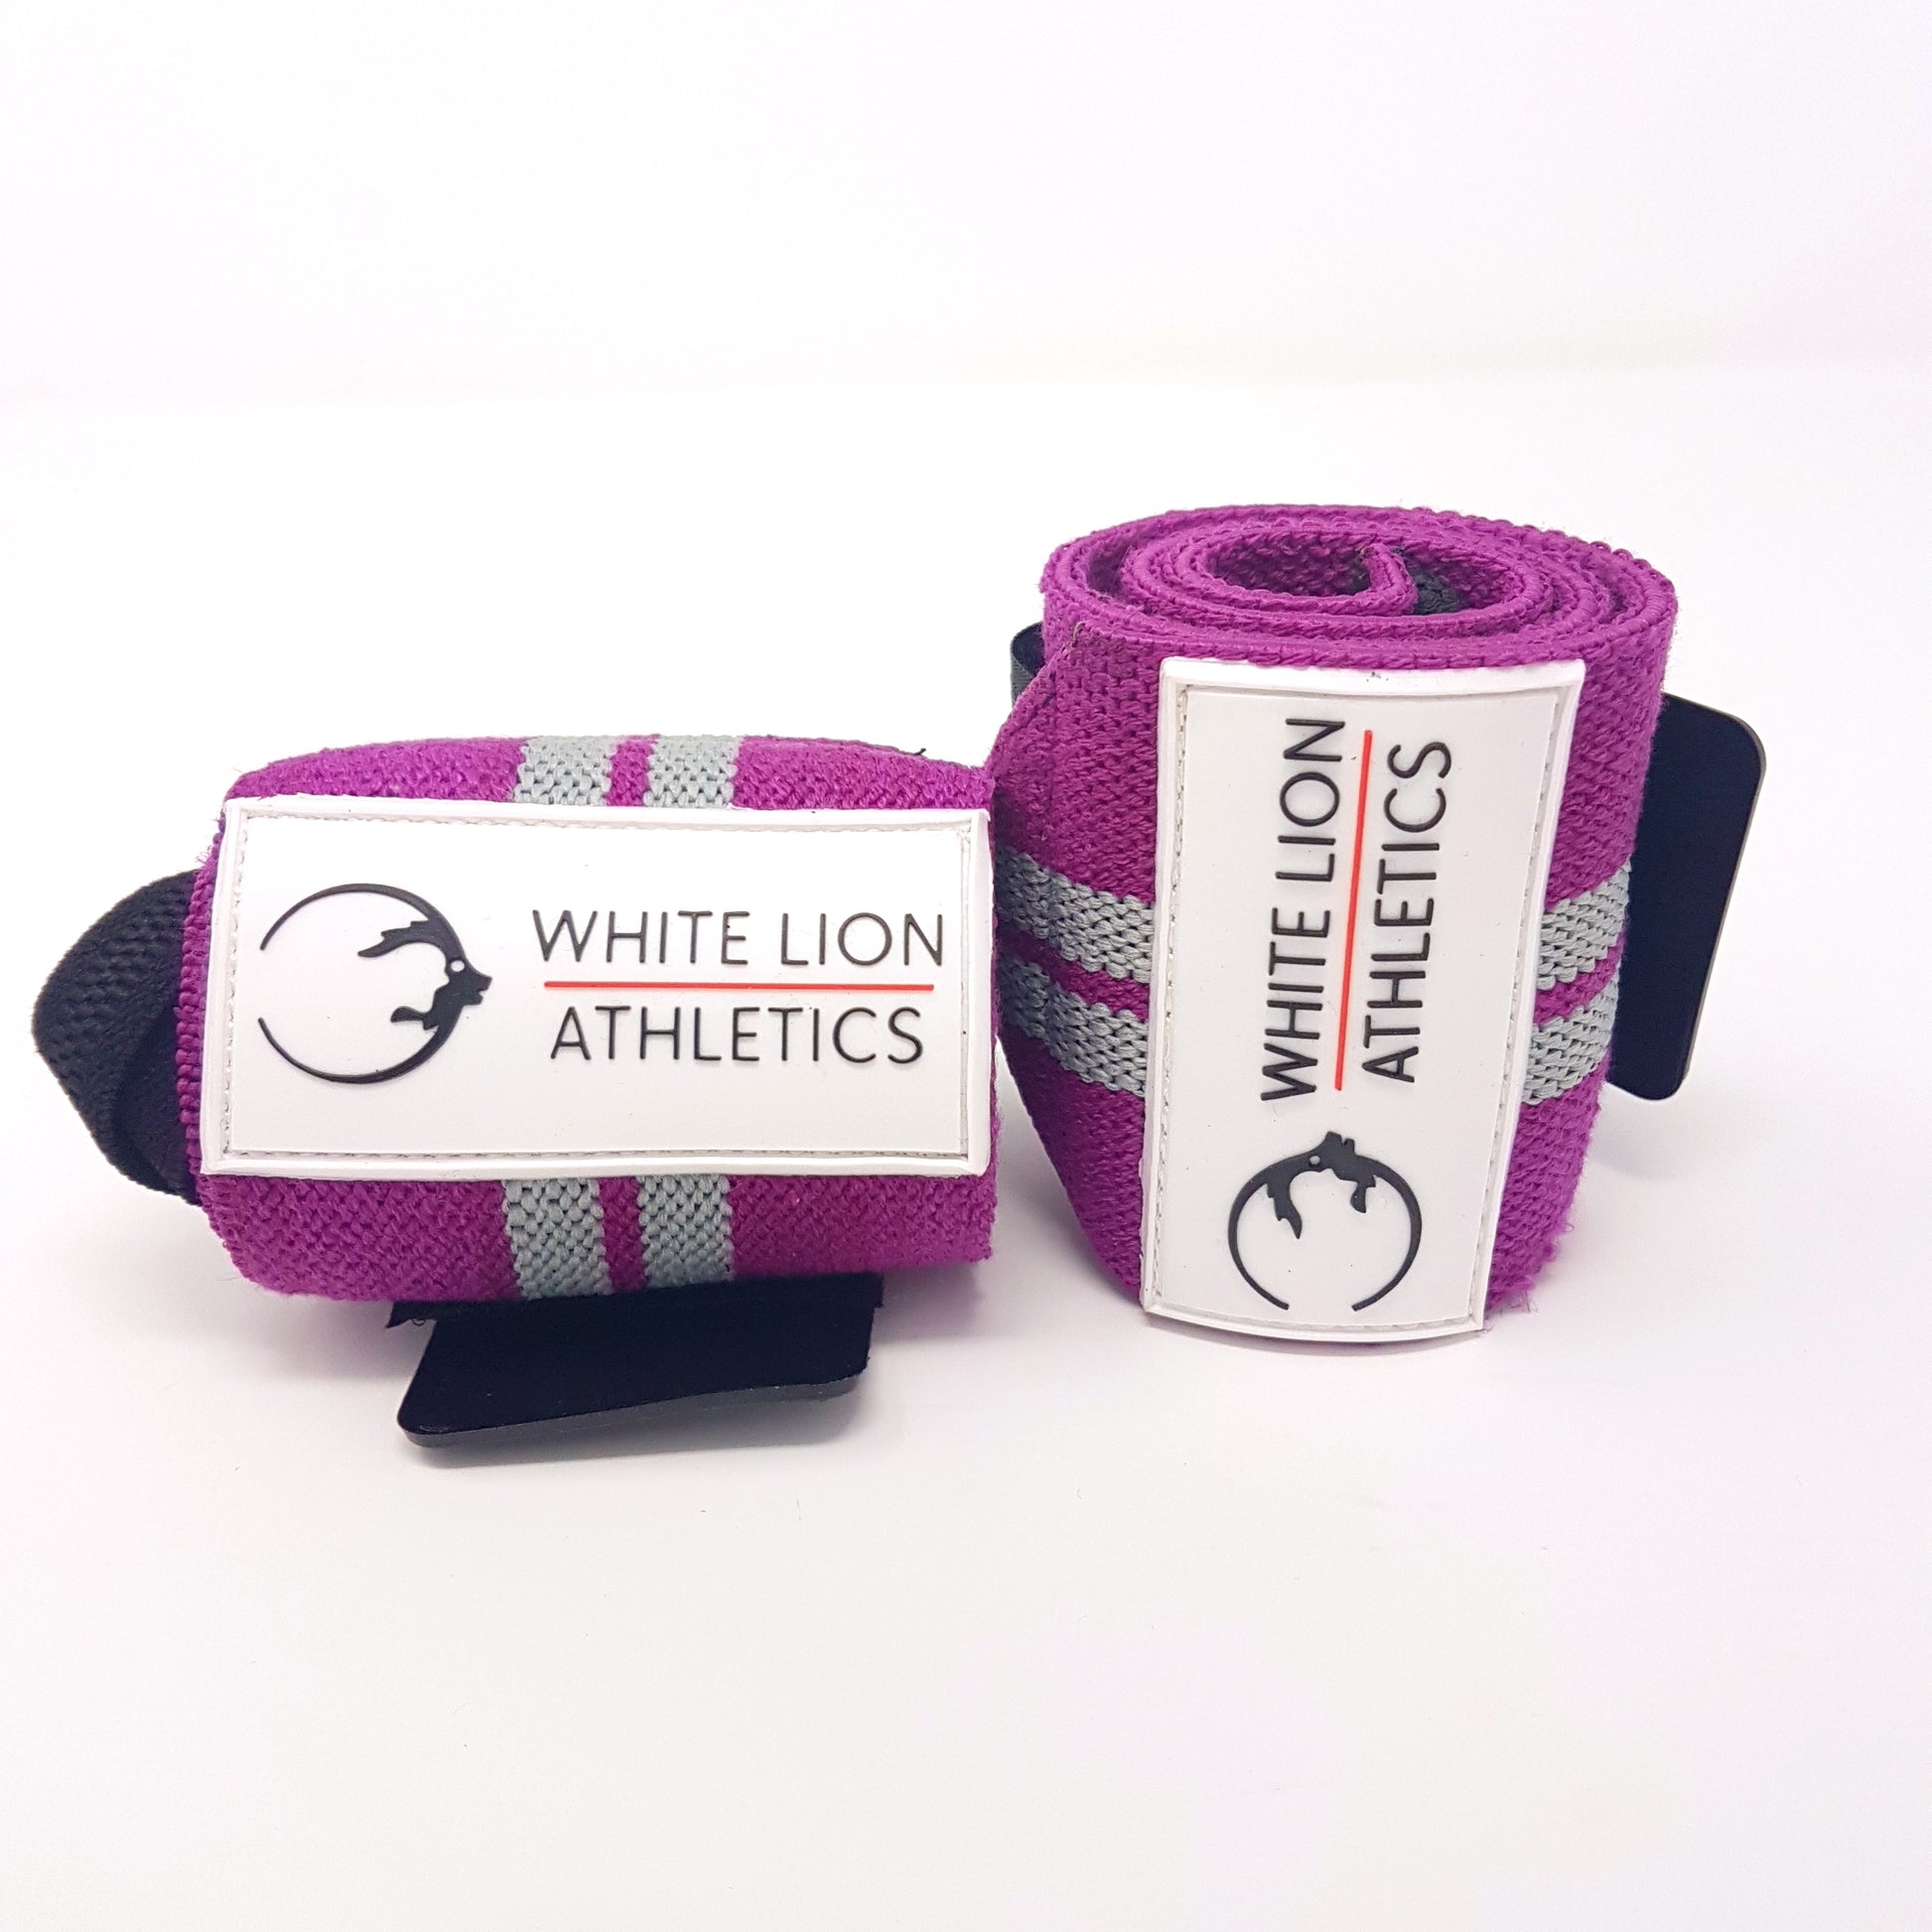 Wrist Wraps| Purple with Grey Stripes| Wrist Support for Weightlifting & Crossfit - White Lion Athletics